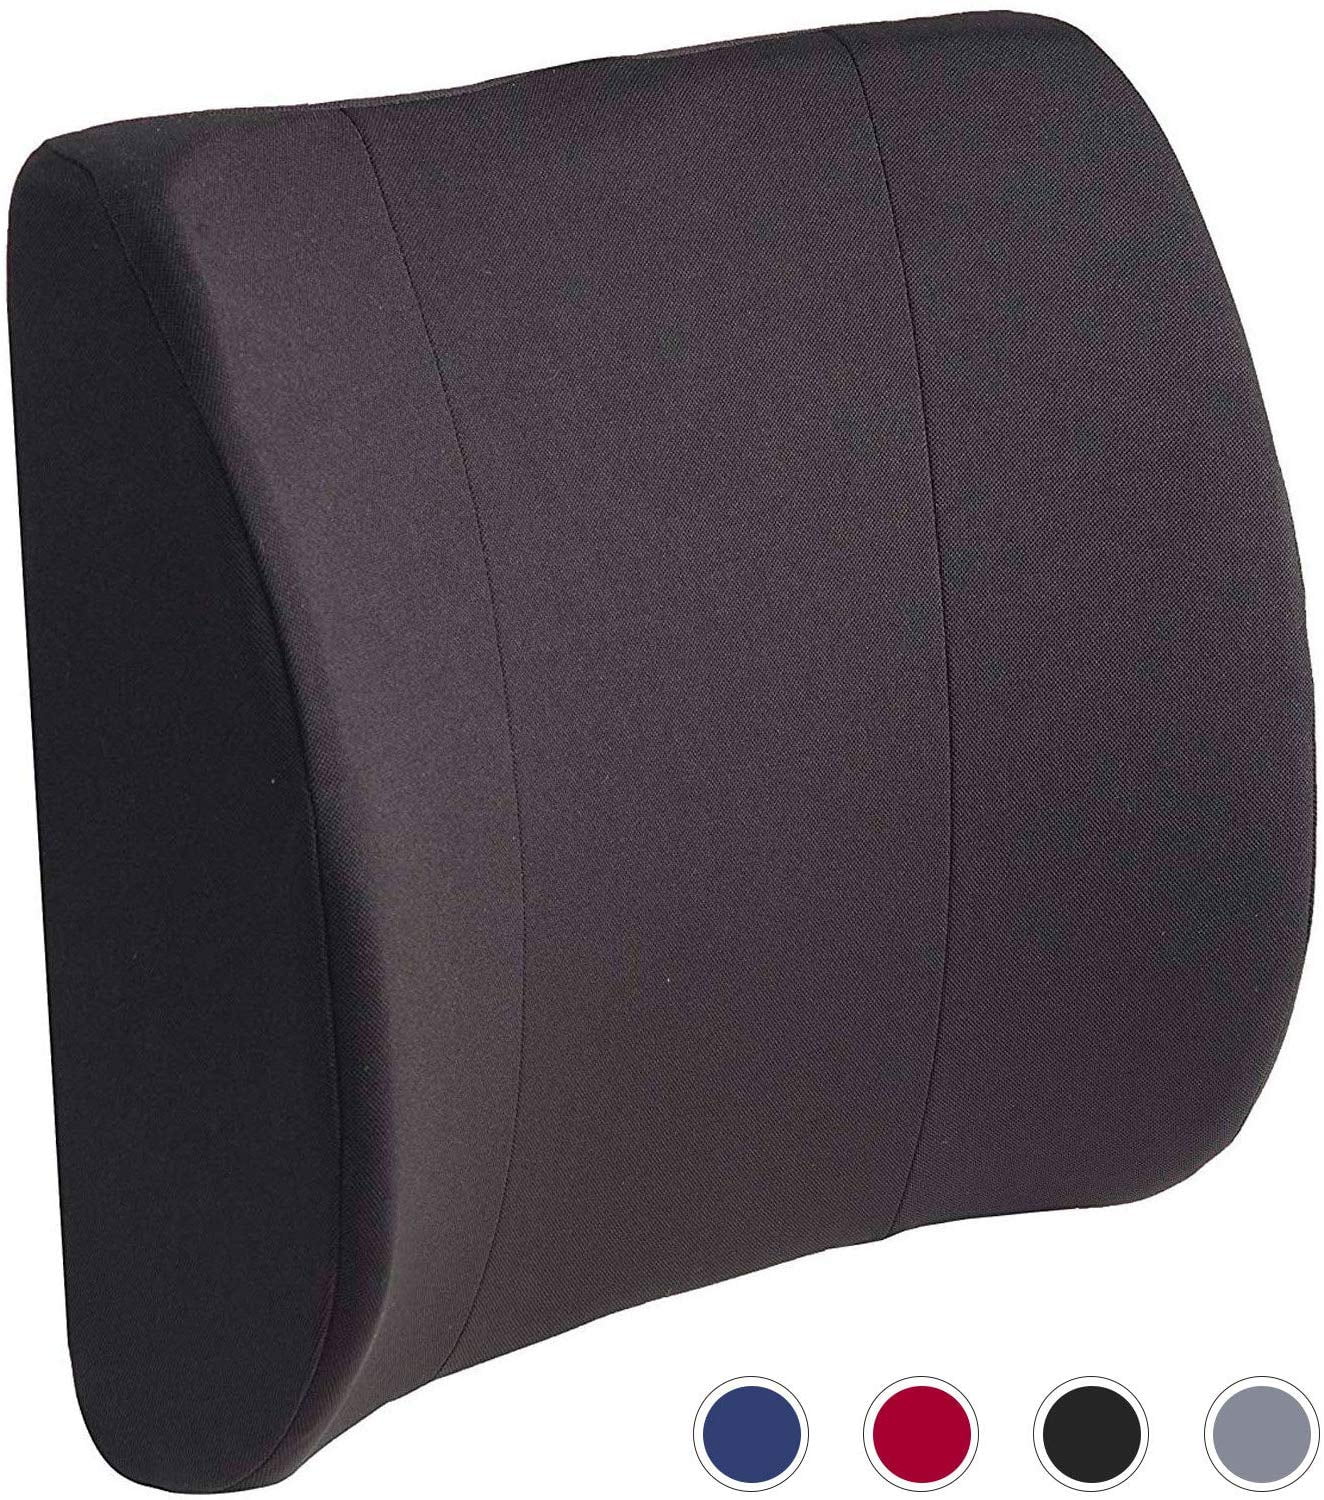 DMI Deluxe Seat Lift Seat Riser Car Cushion Pillow with Black